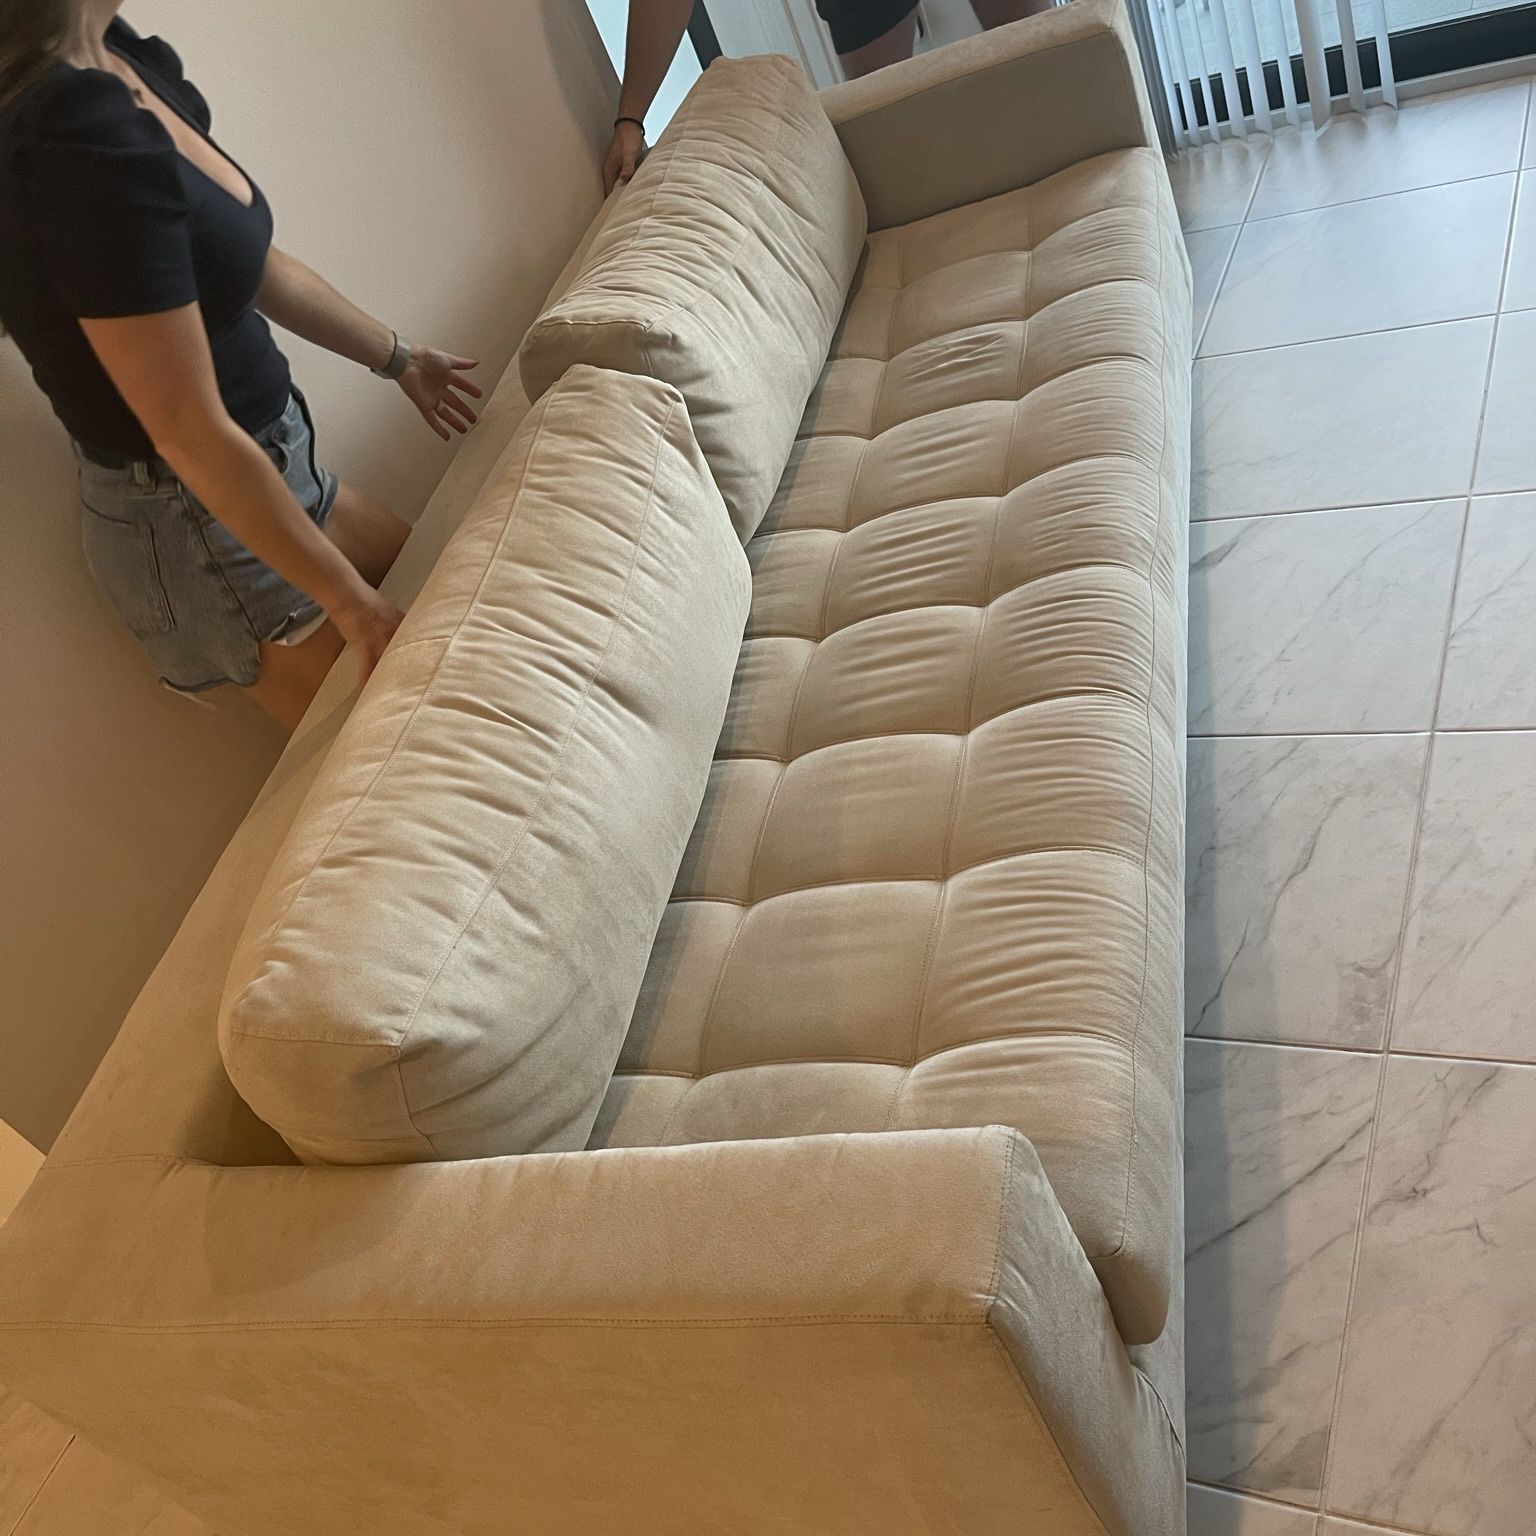 BEIGE COUCH - WILL TAKE BEST OFFER ! MOVING NEED GONE